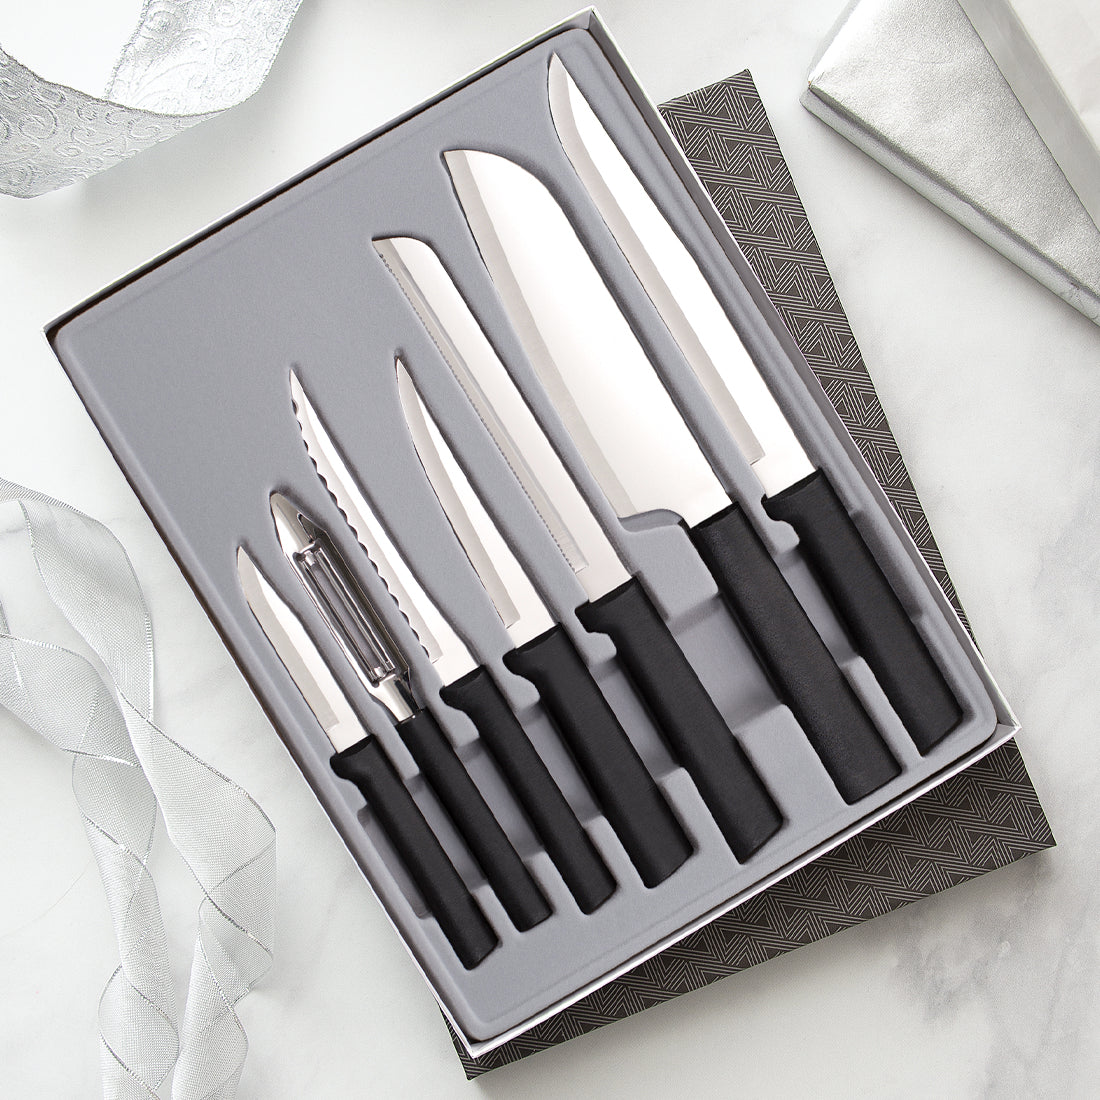 Rada Cutlery 2 Piece Stainless Steel Assorted Knife Set